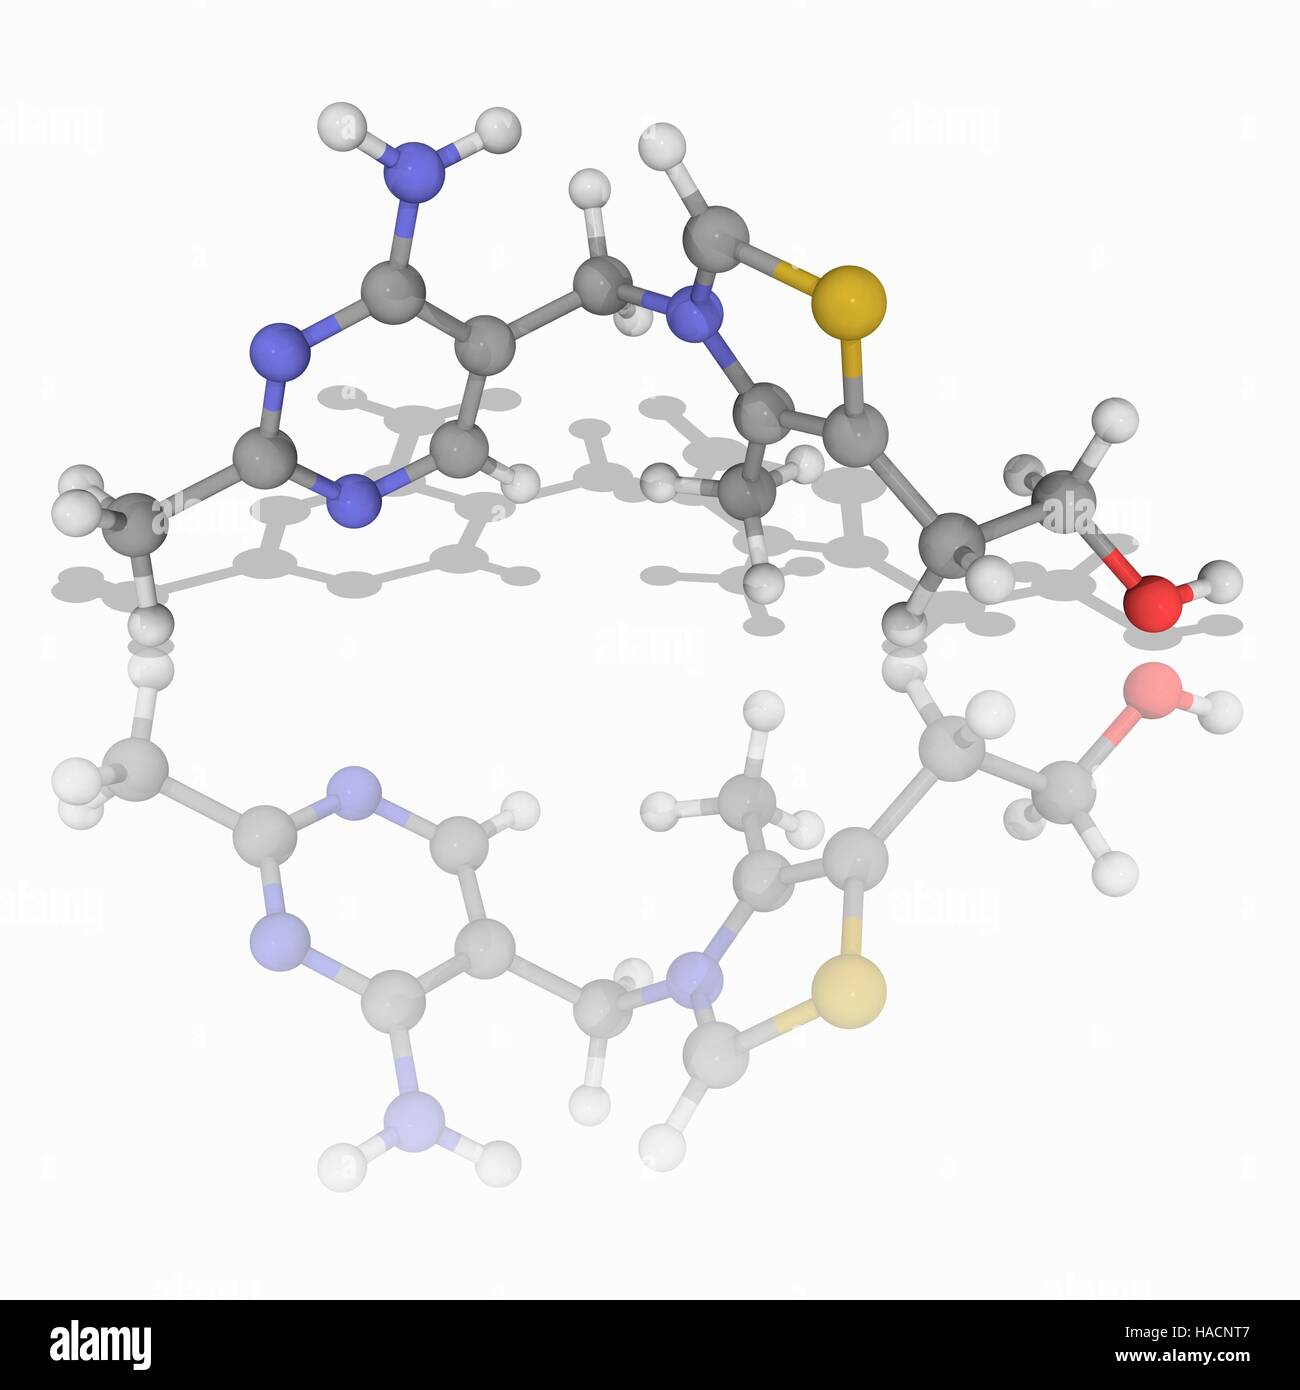 Vitamin B1. Molecular model of thiamine (C12.H17.N4.O.S), also called thiamine and vitamin B1. A deficiency of this vitamin leads to a disease called beriberi. Atoms are represented as spheres and are colour-coded: carbon (grey), hydrogen (white), nitrogen (blue), oxygen (red) and sulphur (yellow). Illustration. Stock Photo